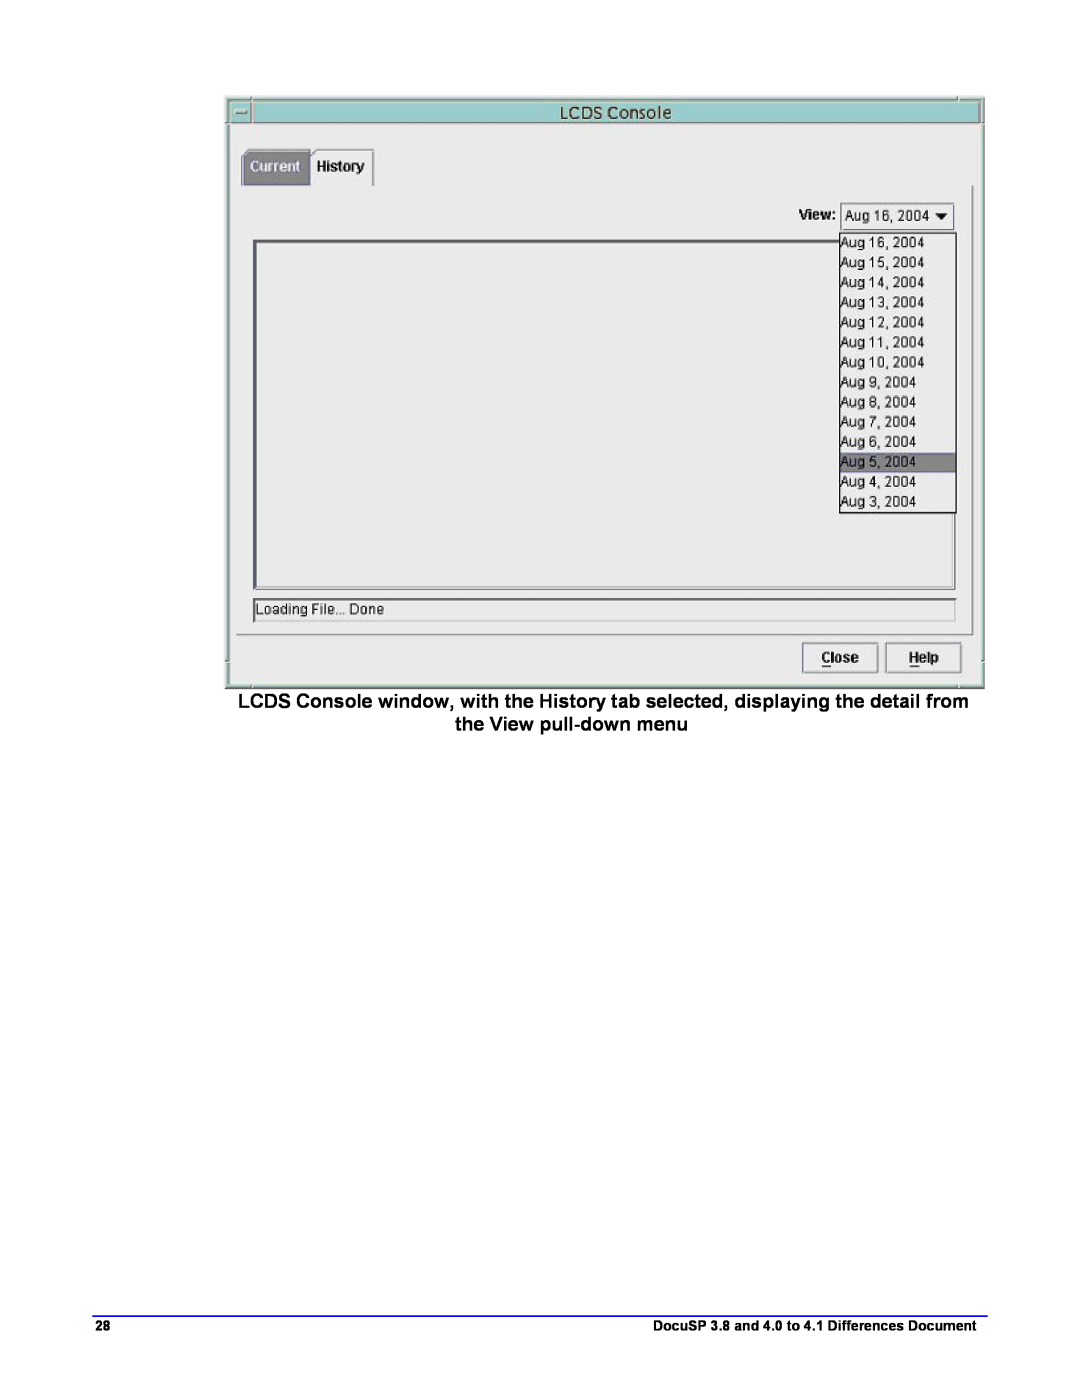 Xerox 4.2 manual DocuSP 3.8 and 4.0 to 4.1 Differences Document 